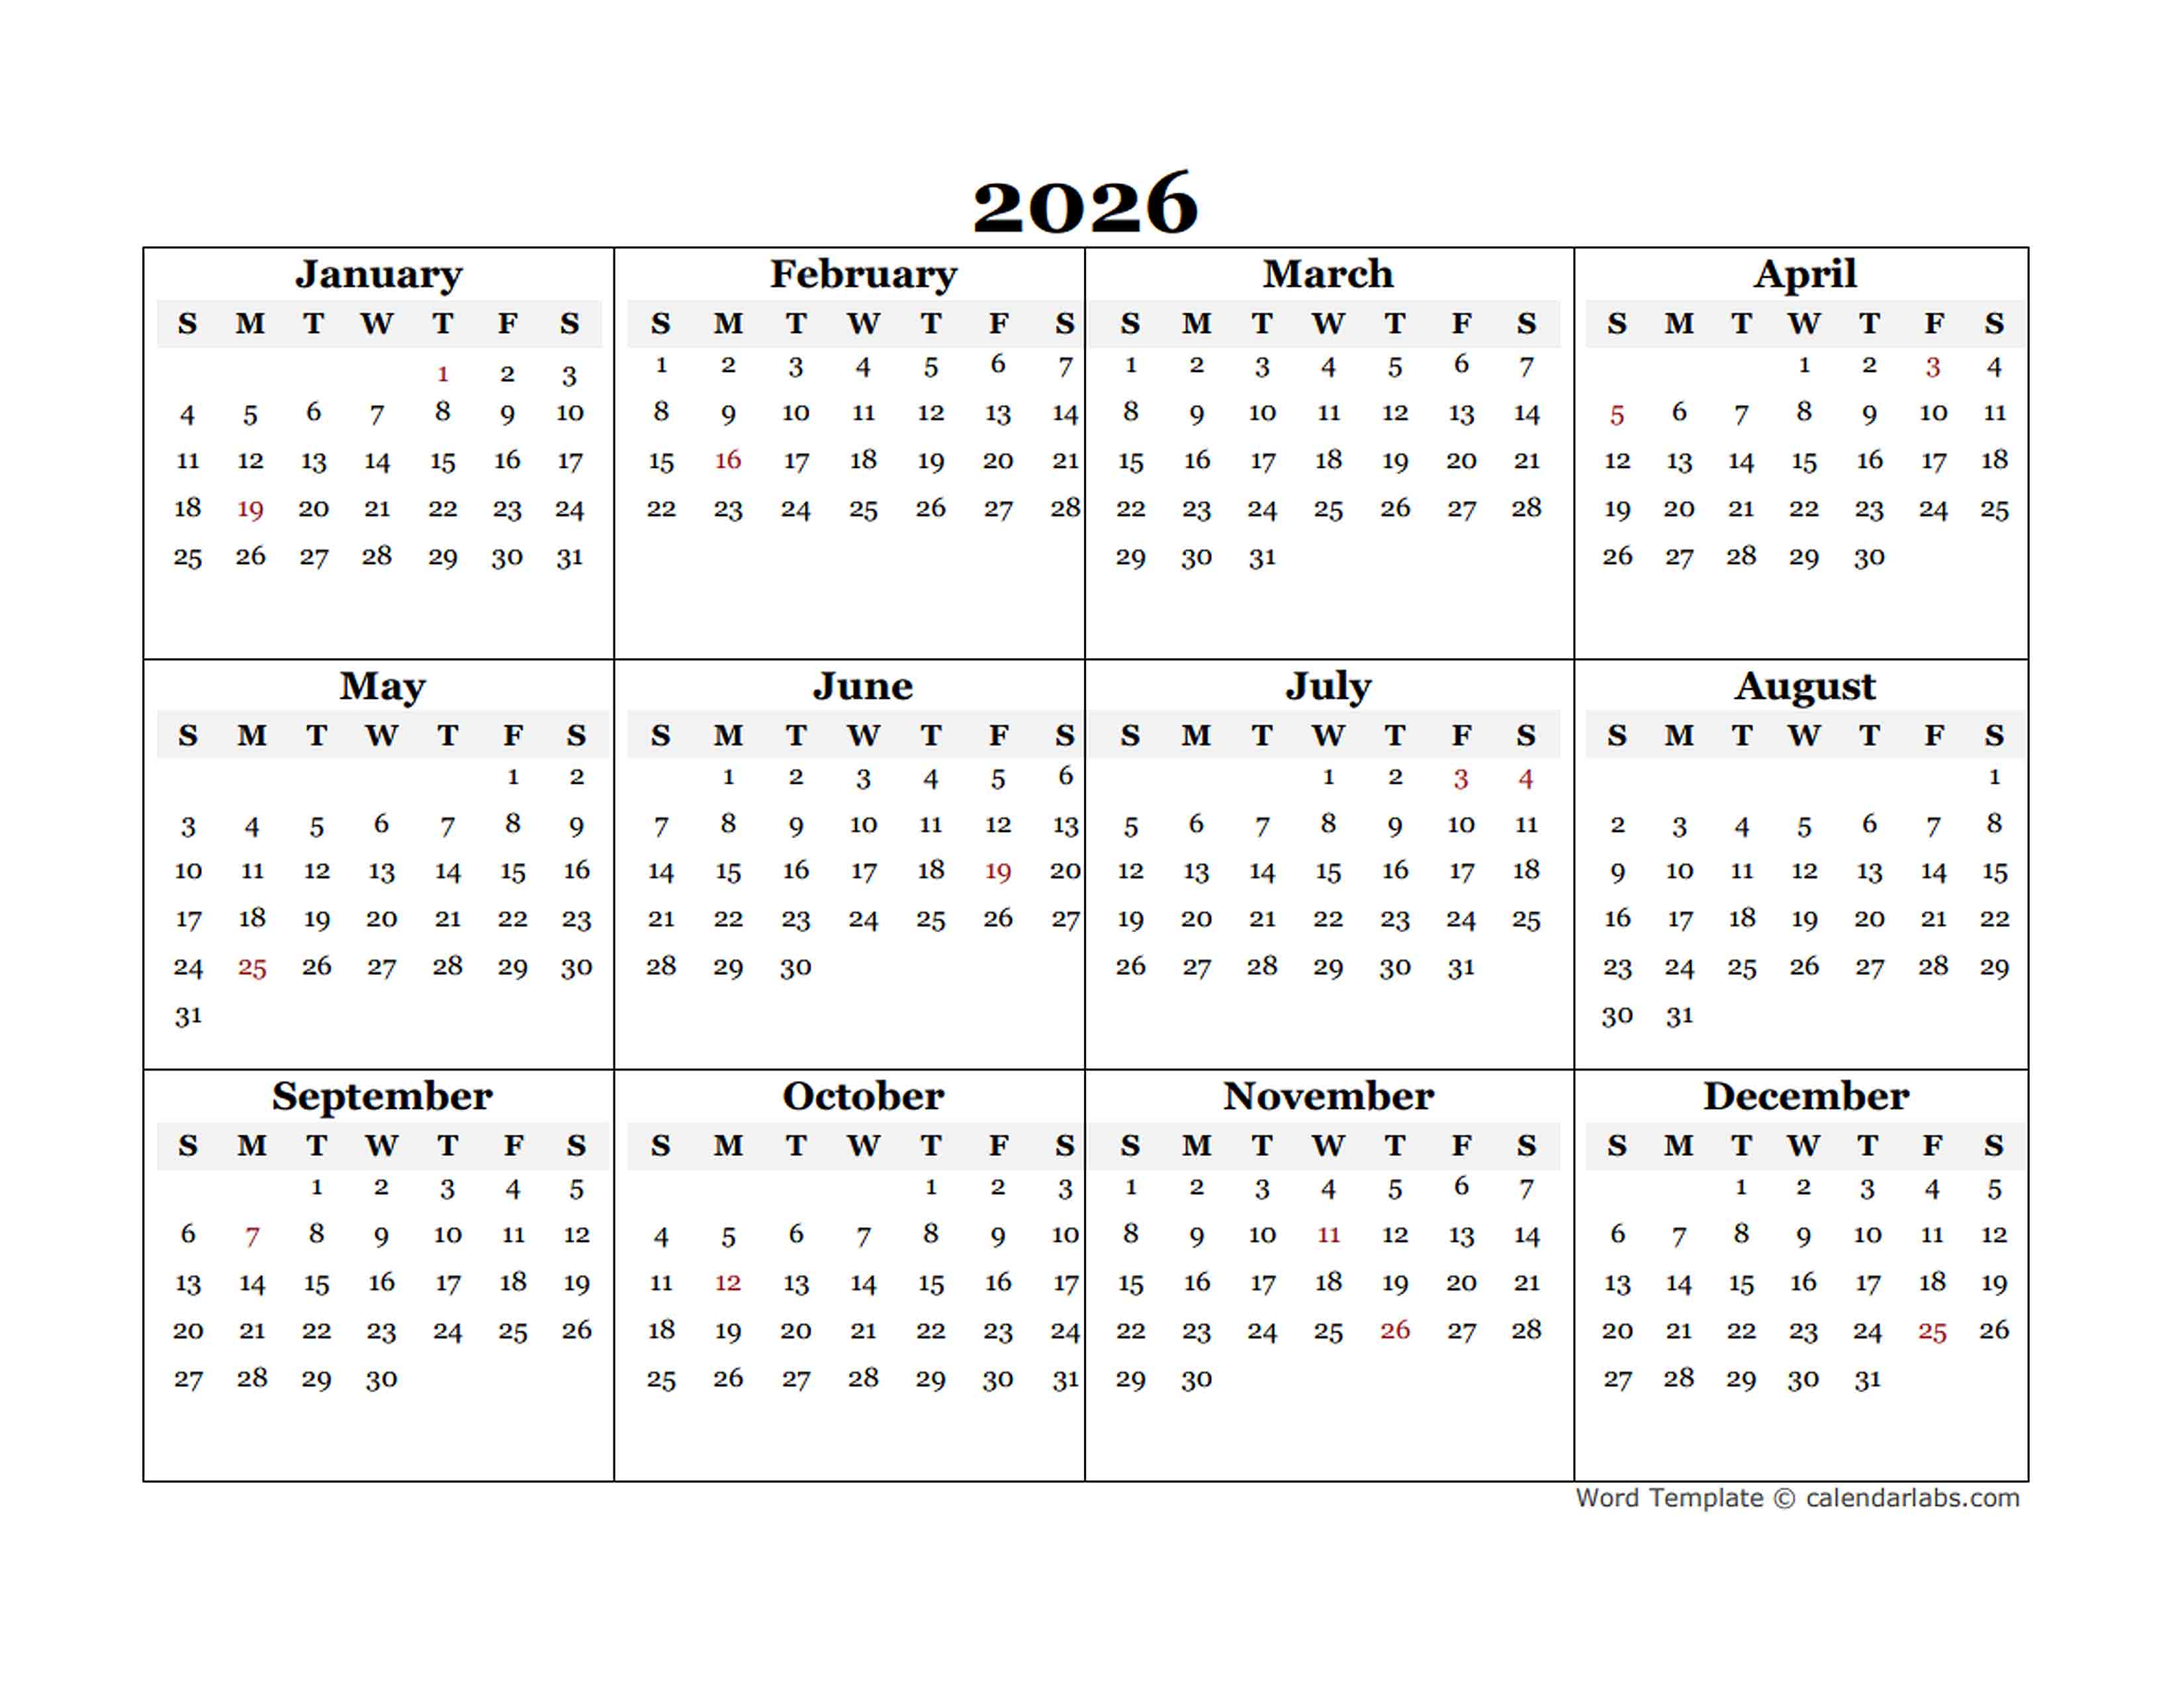 2026 Blank Yearly Word Calendar Template - Free Printable Templates